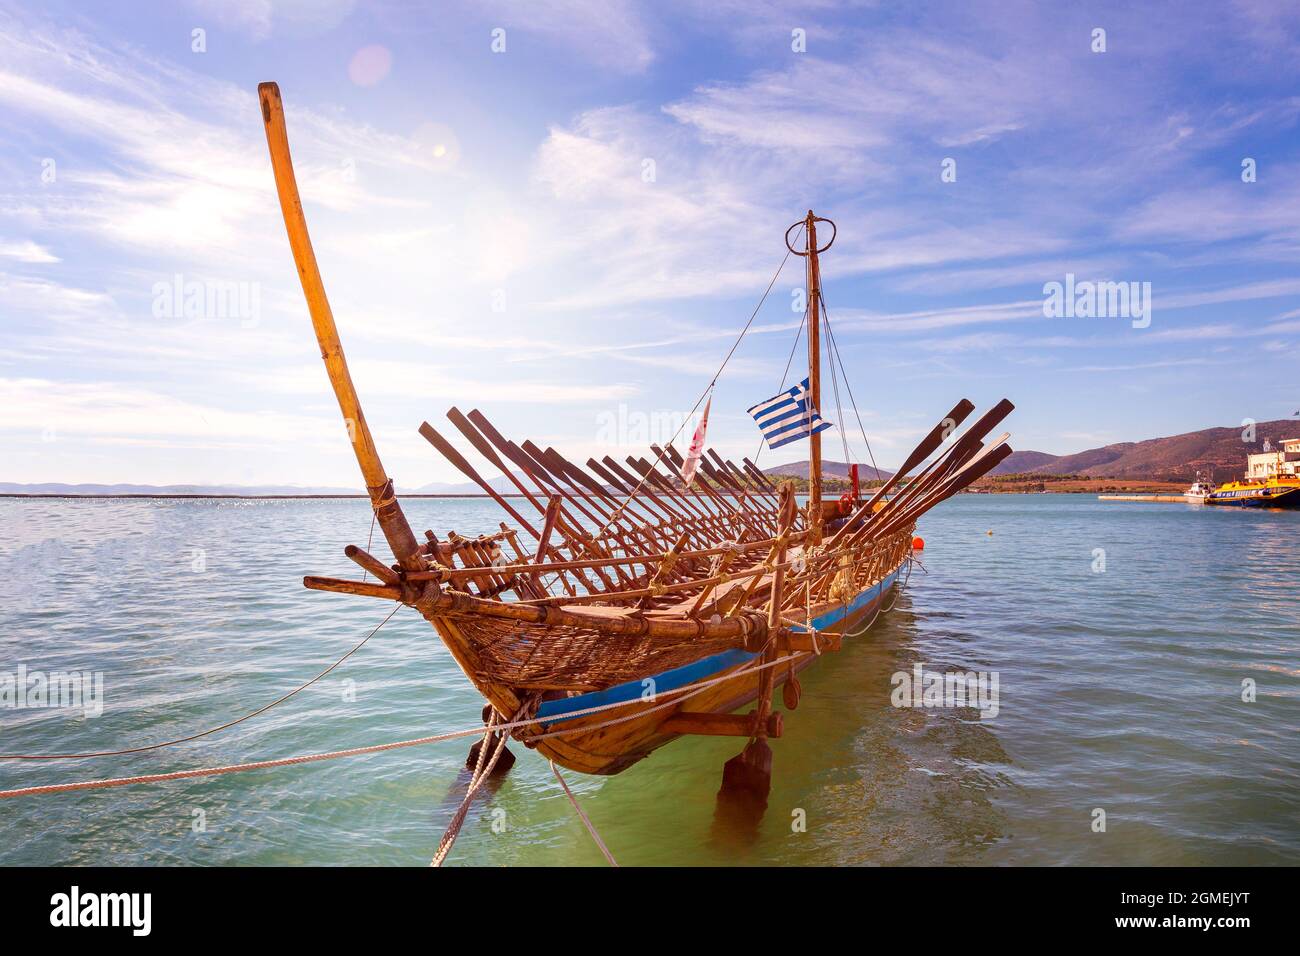 Replica of Argo mythical ship of Jason and the Argonauts in Volos, Greece Stock Photo